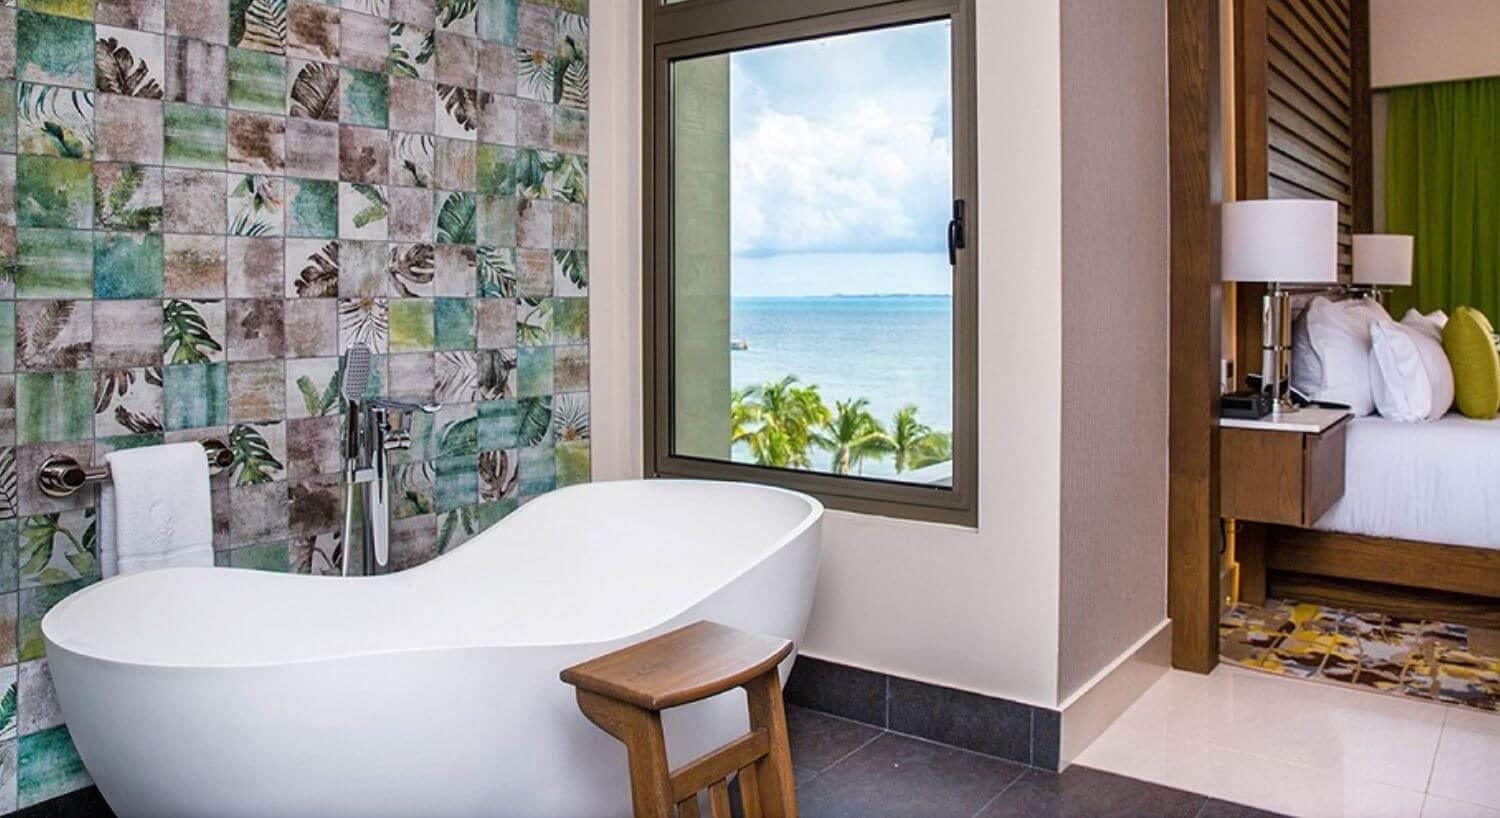 A deep white soaking tub with a window with ocean views and the tops of palm trees, and a bedroom with the head of the bed and nightstands.